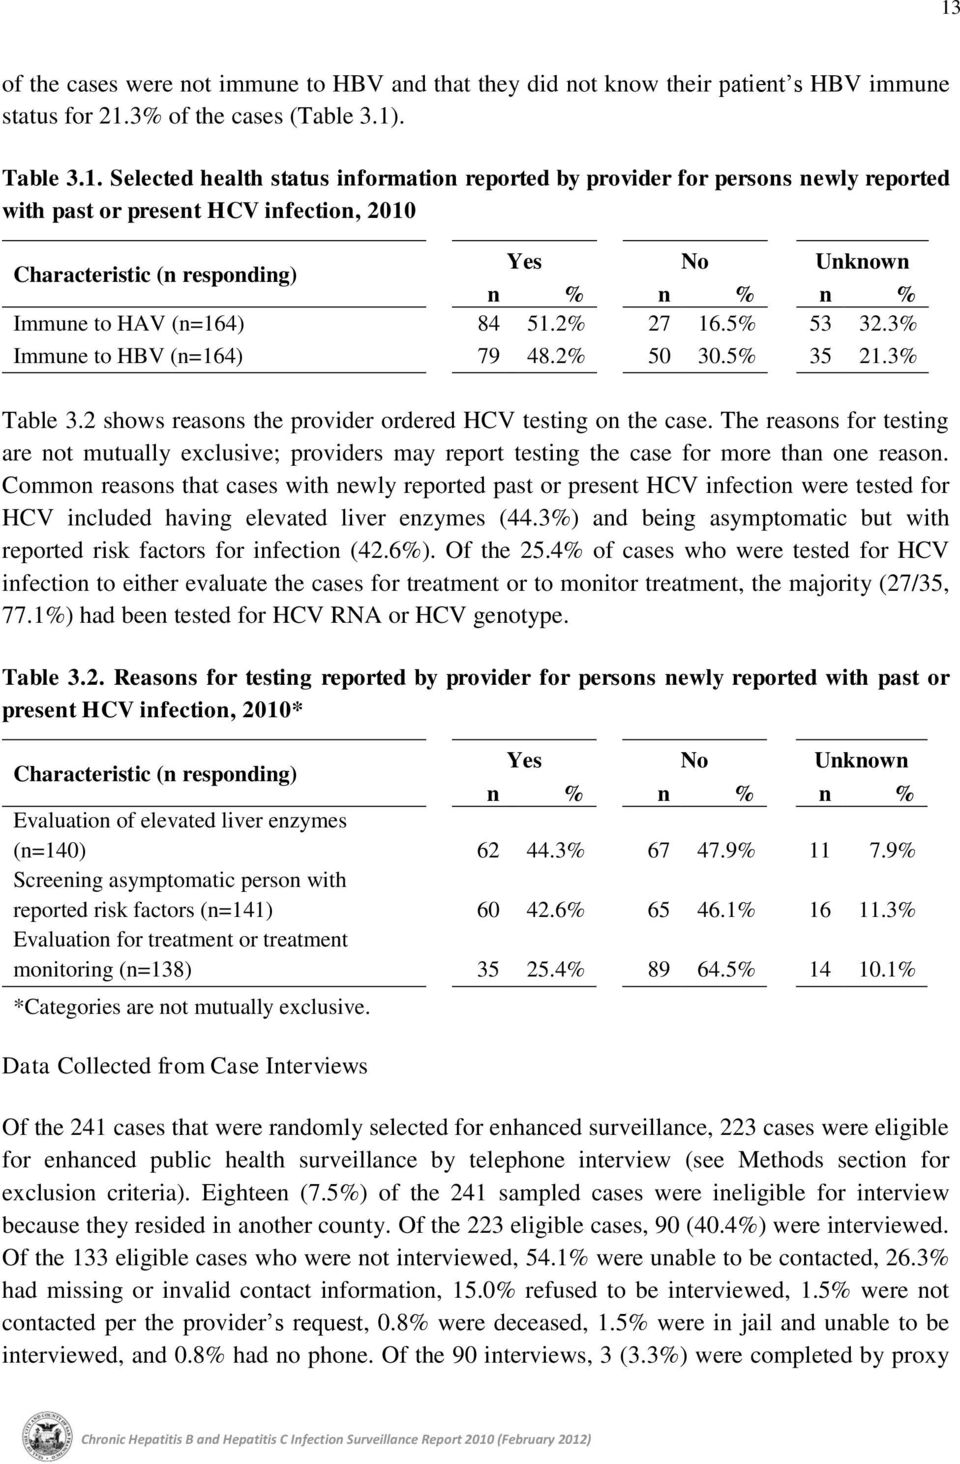 3% Immune to HBV (n=164) 79 48.2% 50 30.5% 35 21.3% Table 3.2 shows reasons the provider ordered HCV testing on the case.